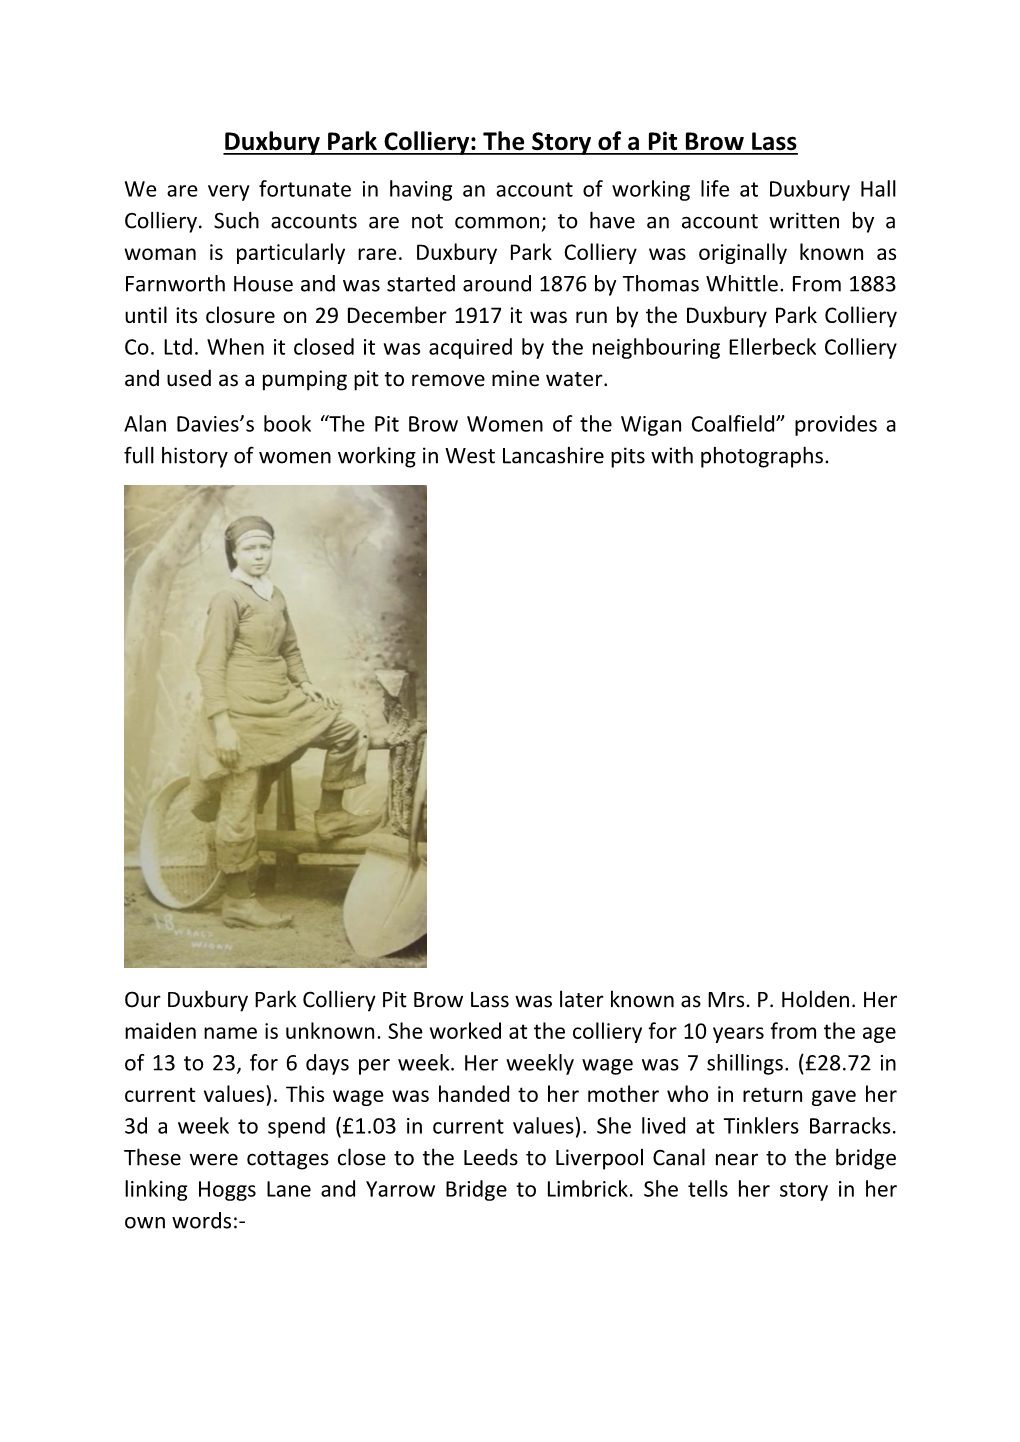 Duxbury Park Colliery: the Story of a Pit Brow Lass We Are Very Fortunate in Having an Account of Working Life at Duxbury Hall Colliery